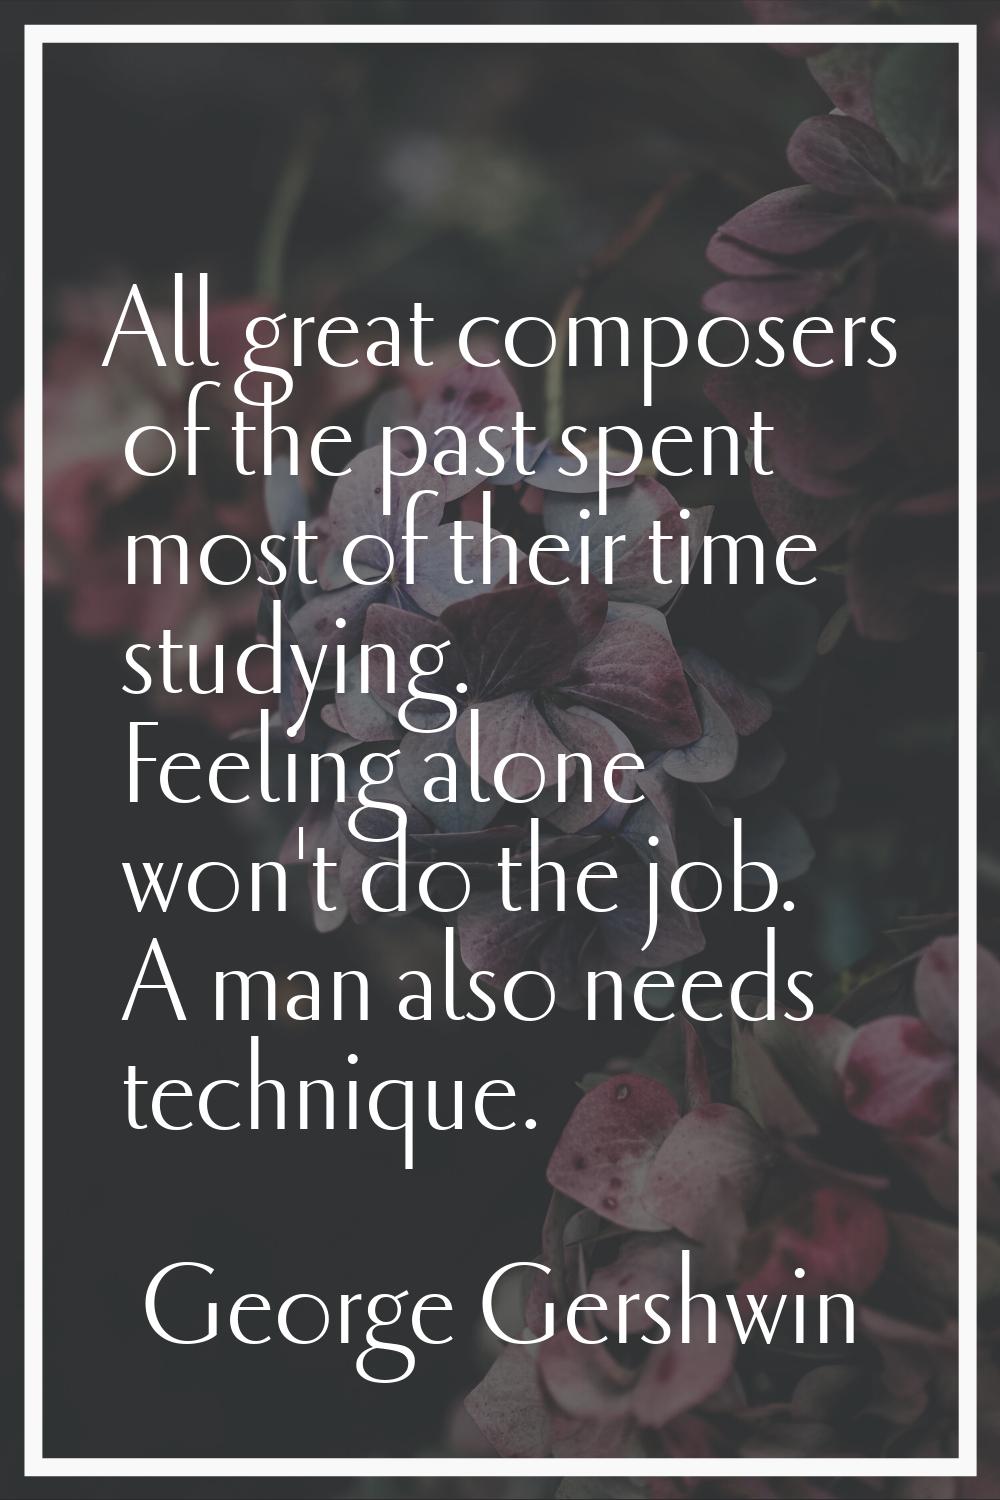 All great composers of the past spent most of their time studying. Feeling alone won't do the job. 